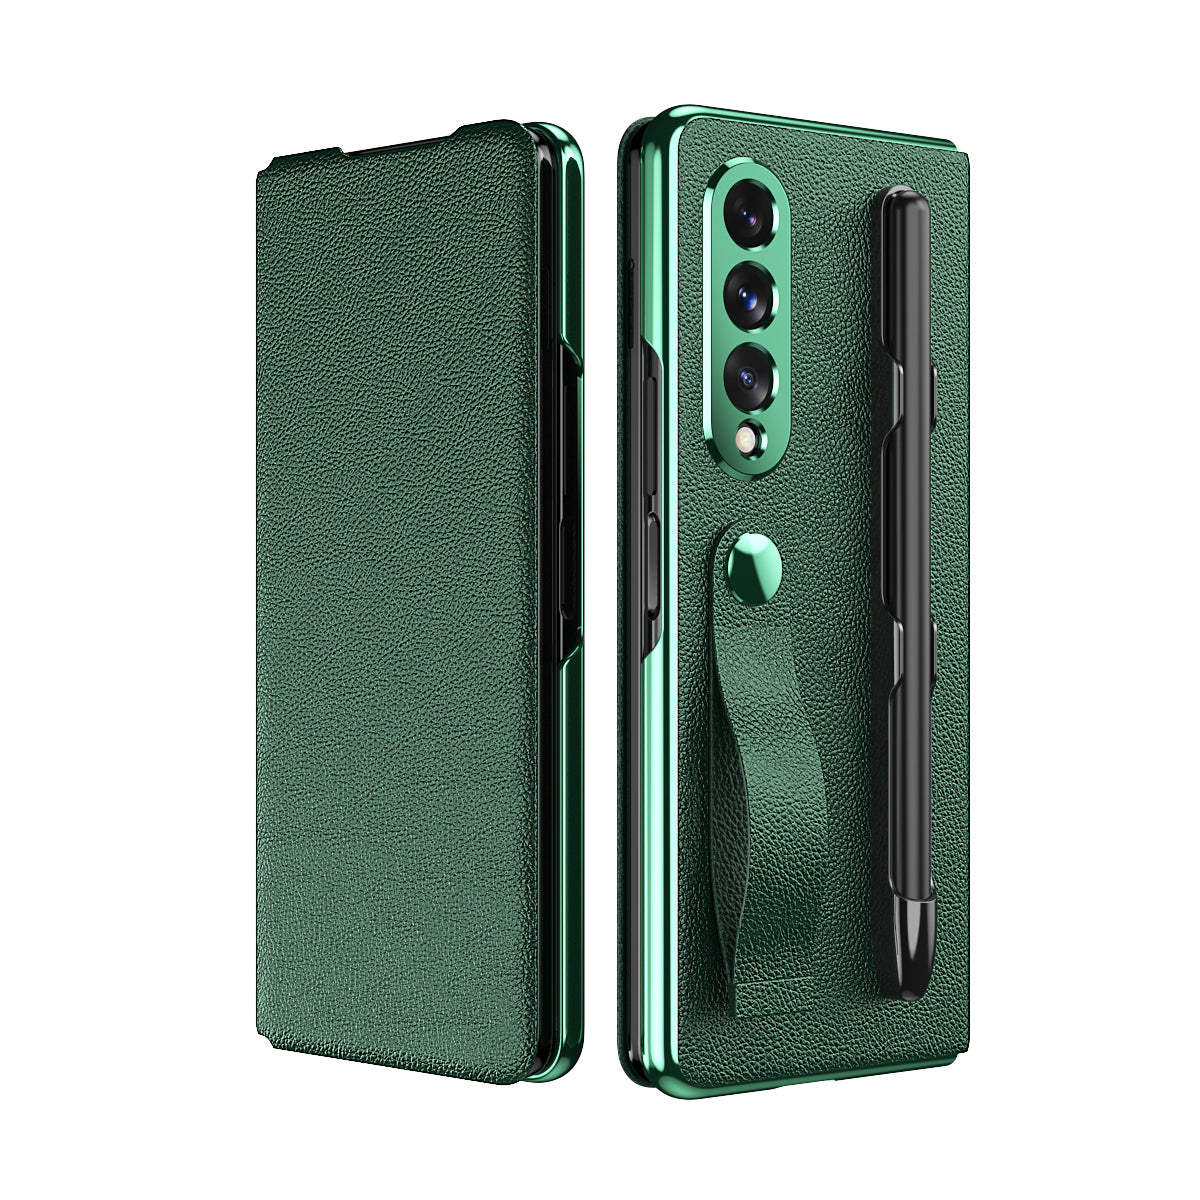 Z Fold 3 Leather Case Protable Hand Strap For Samsung Galaxy W22 5G With S Pen Rack Magnetic Fold Case For Samsung Z Fold3 5G